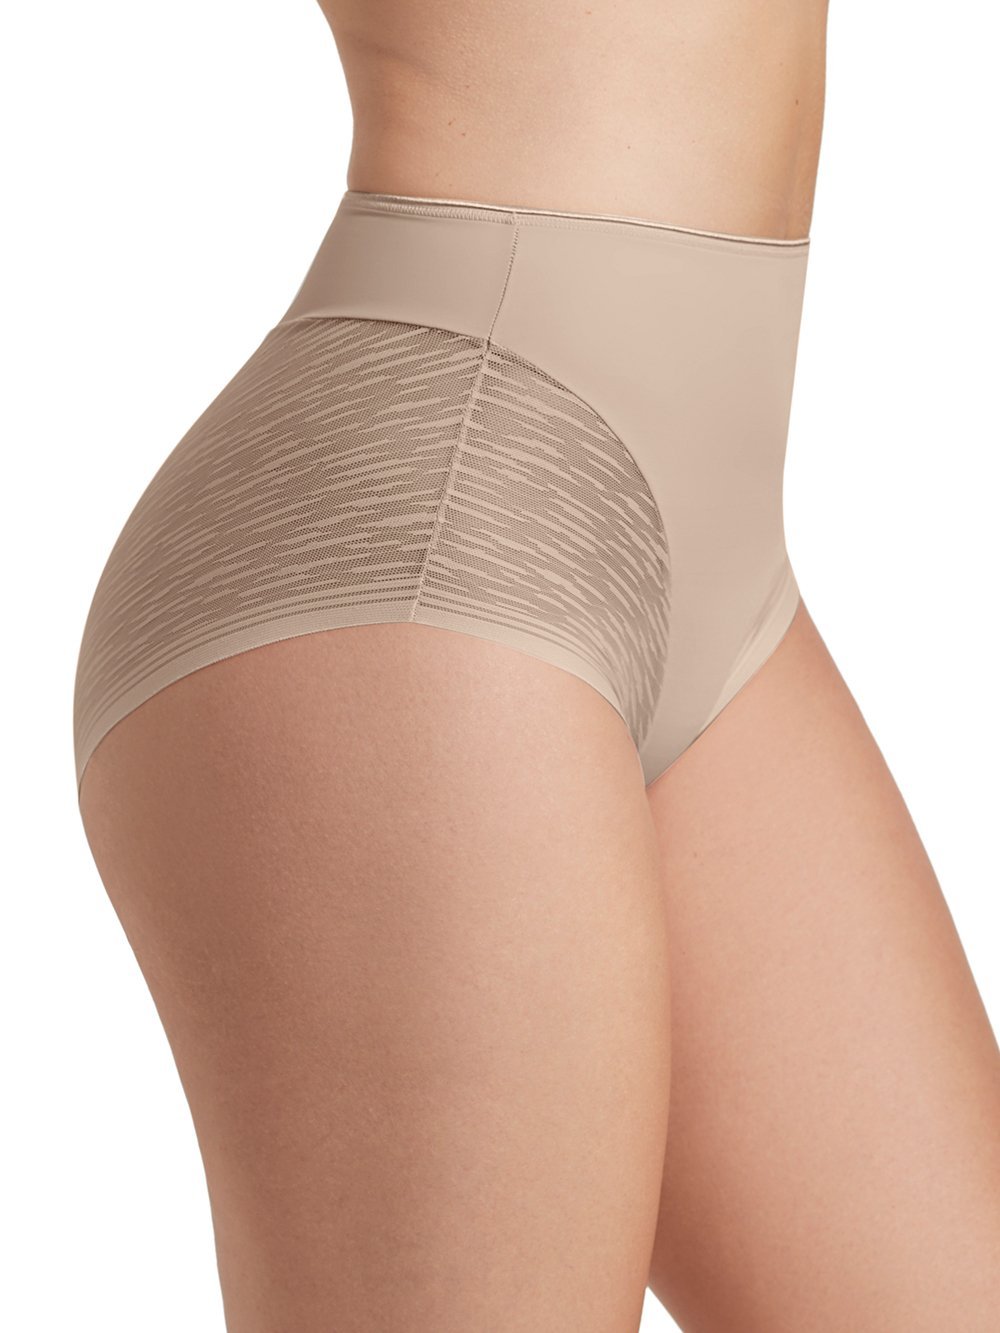 Leonisa Panties Light Brown / S High-Waisted Sheer Lace Shaper Panty